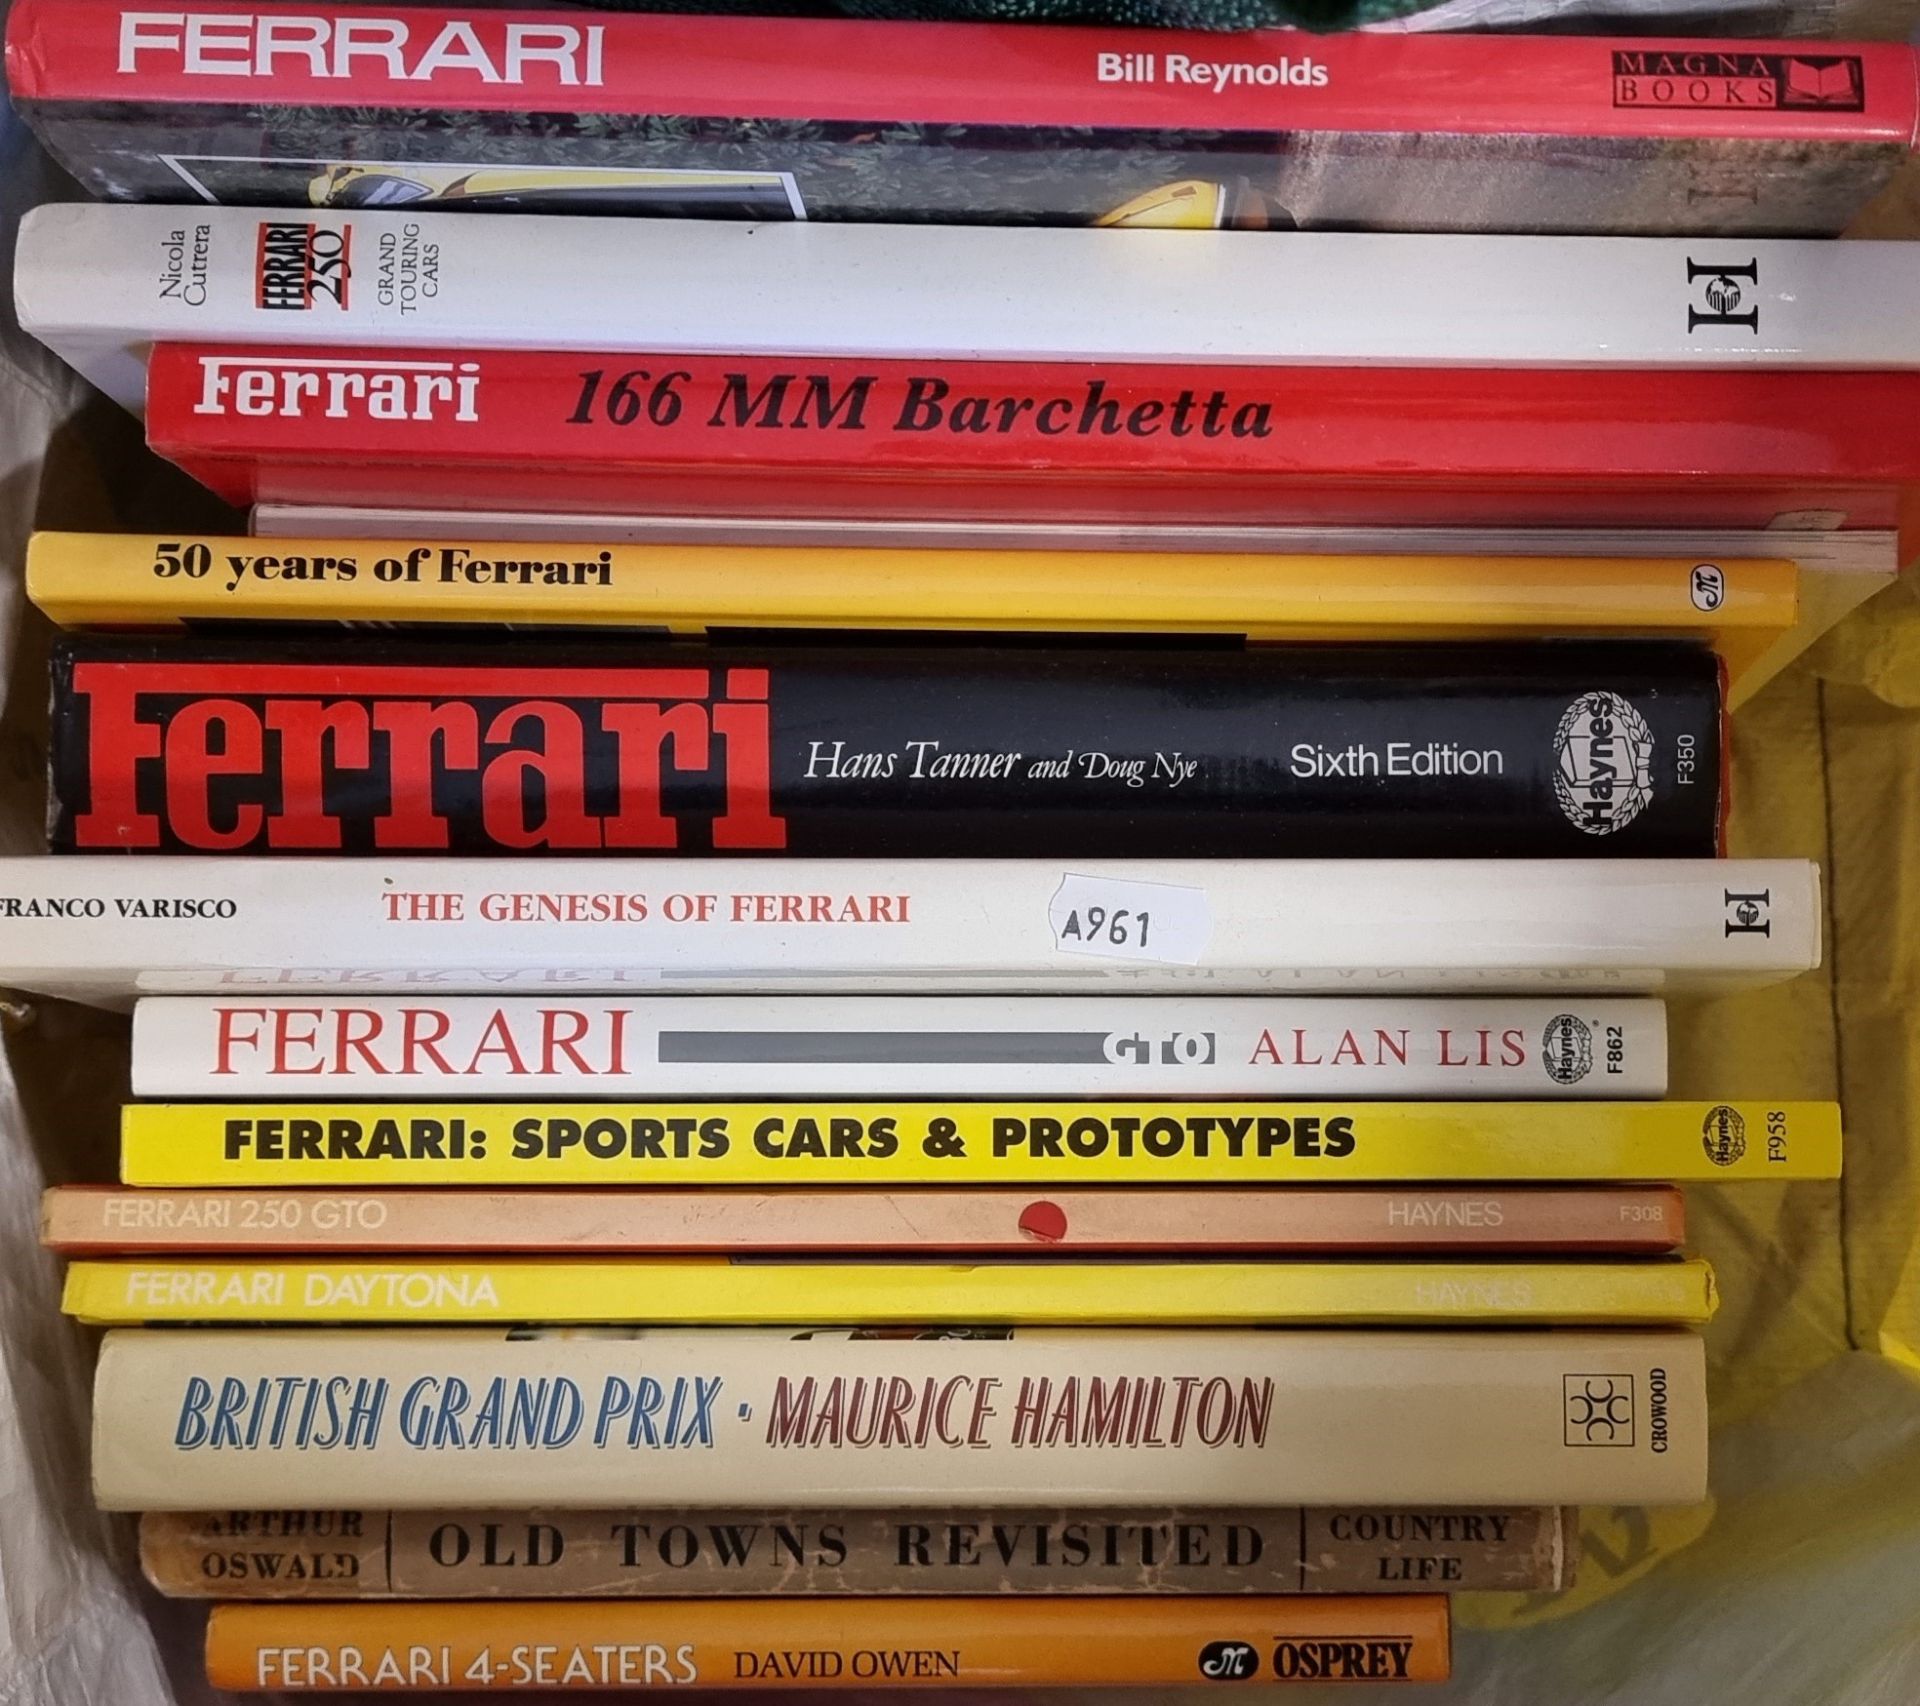 A collection of 22 books related to Ferraris, including Ferrari Ecurie Garage by Nada and Ferrari - Image 2 of 2